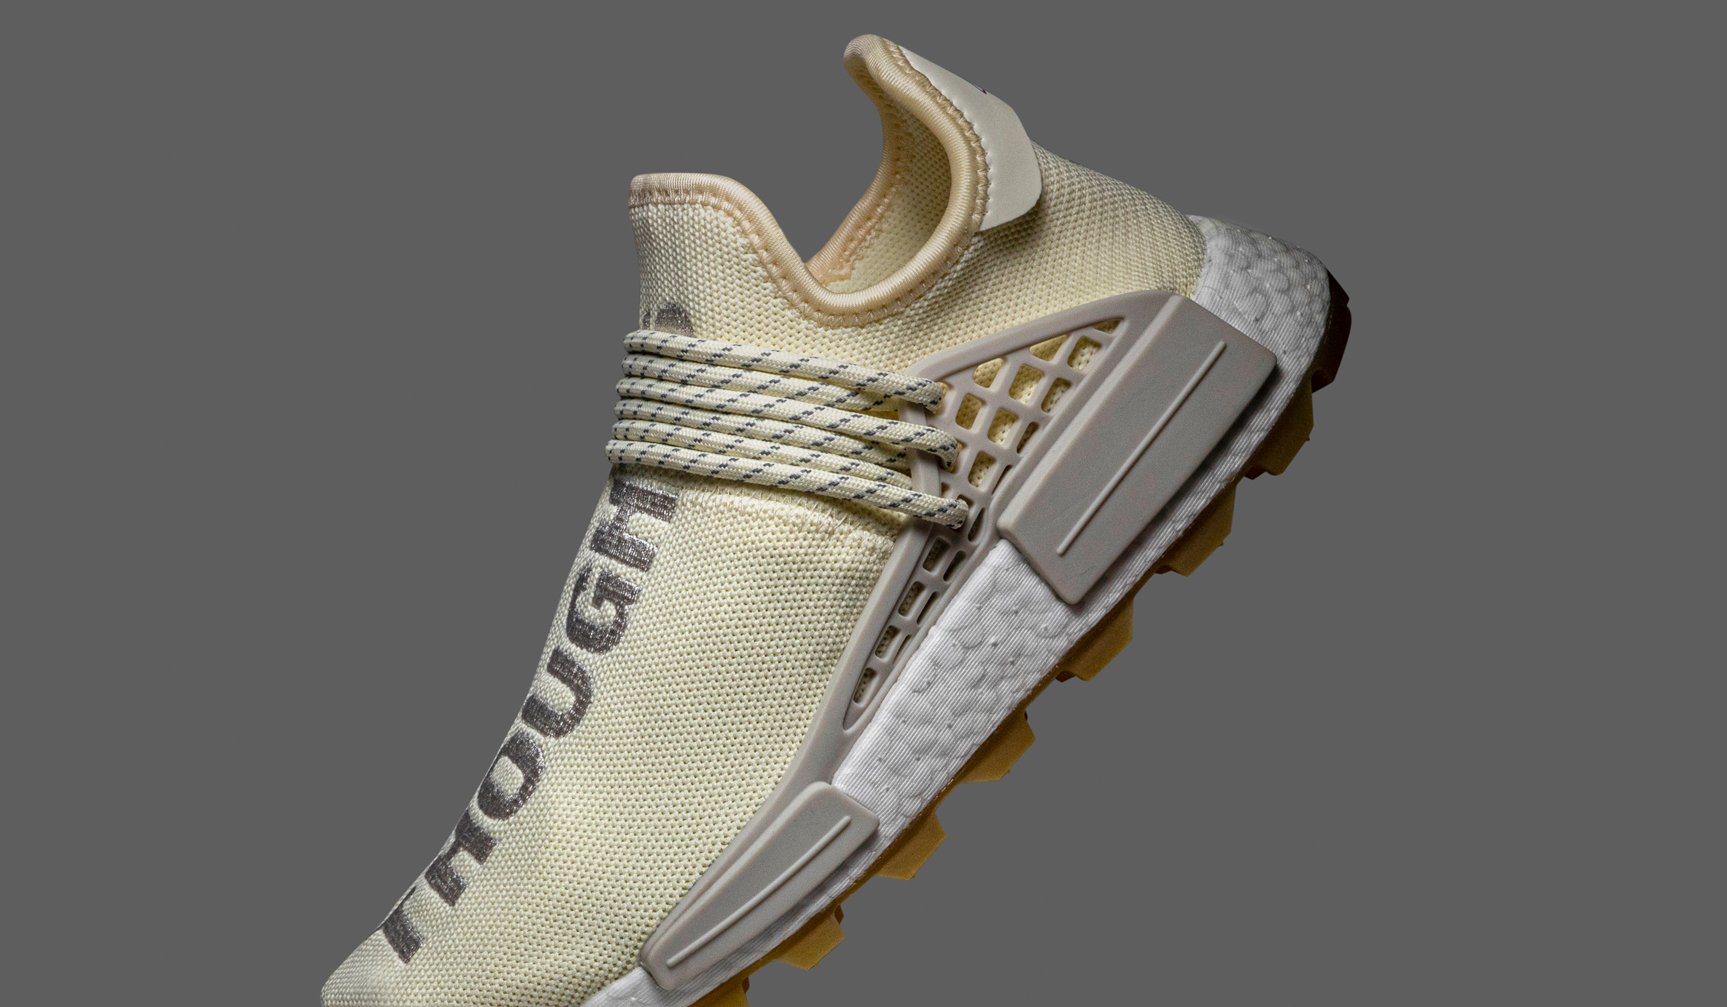 GOAT on Twitter: "Part of the 'Now is her time' collection that focuses on  female empowerment, the latest Pharrell x NMD Human Race Trail features a  neutral Cream White Primeknit upper with '